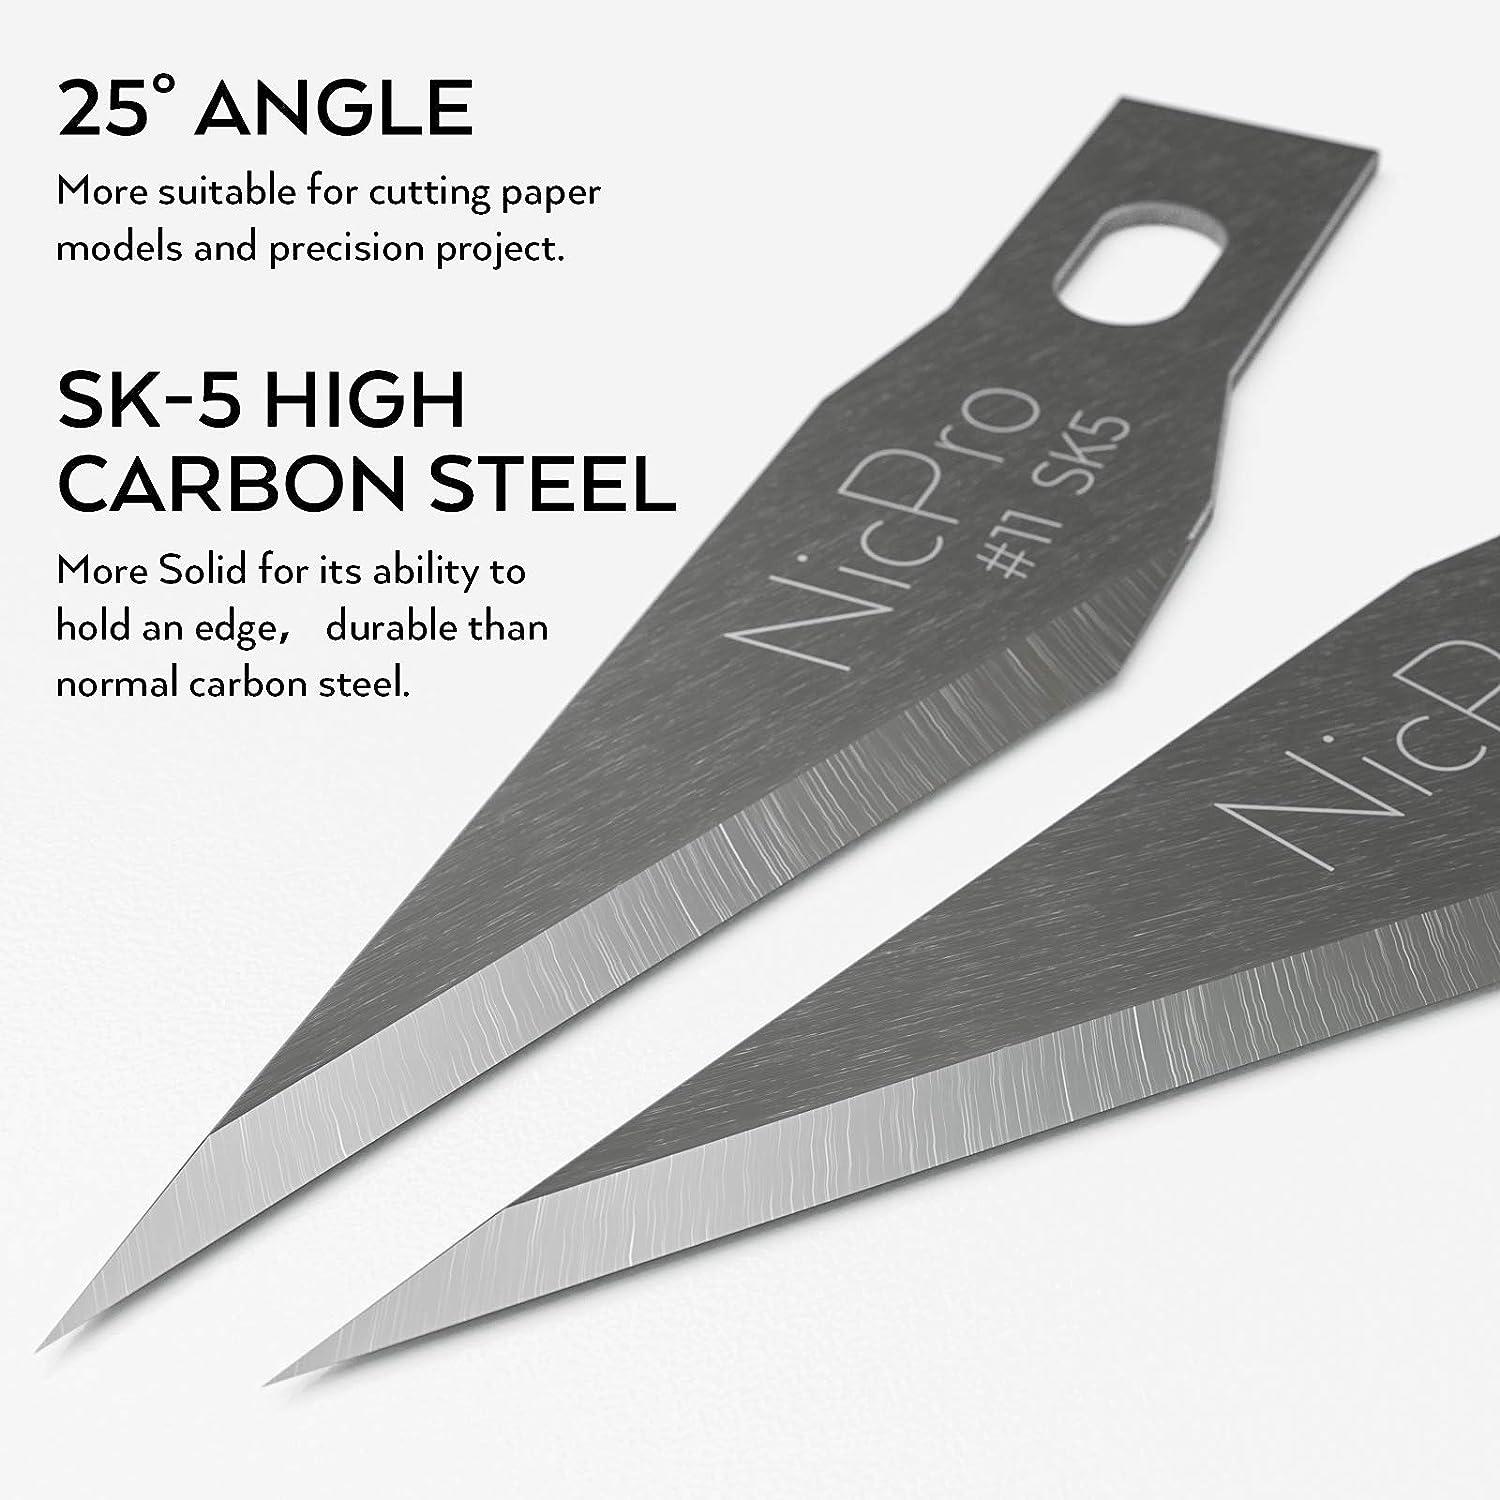 FREE SHIPPING - #1 Hobby Knife, 1 Blade, High Carbon Steel Blade